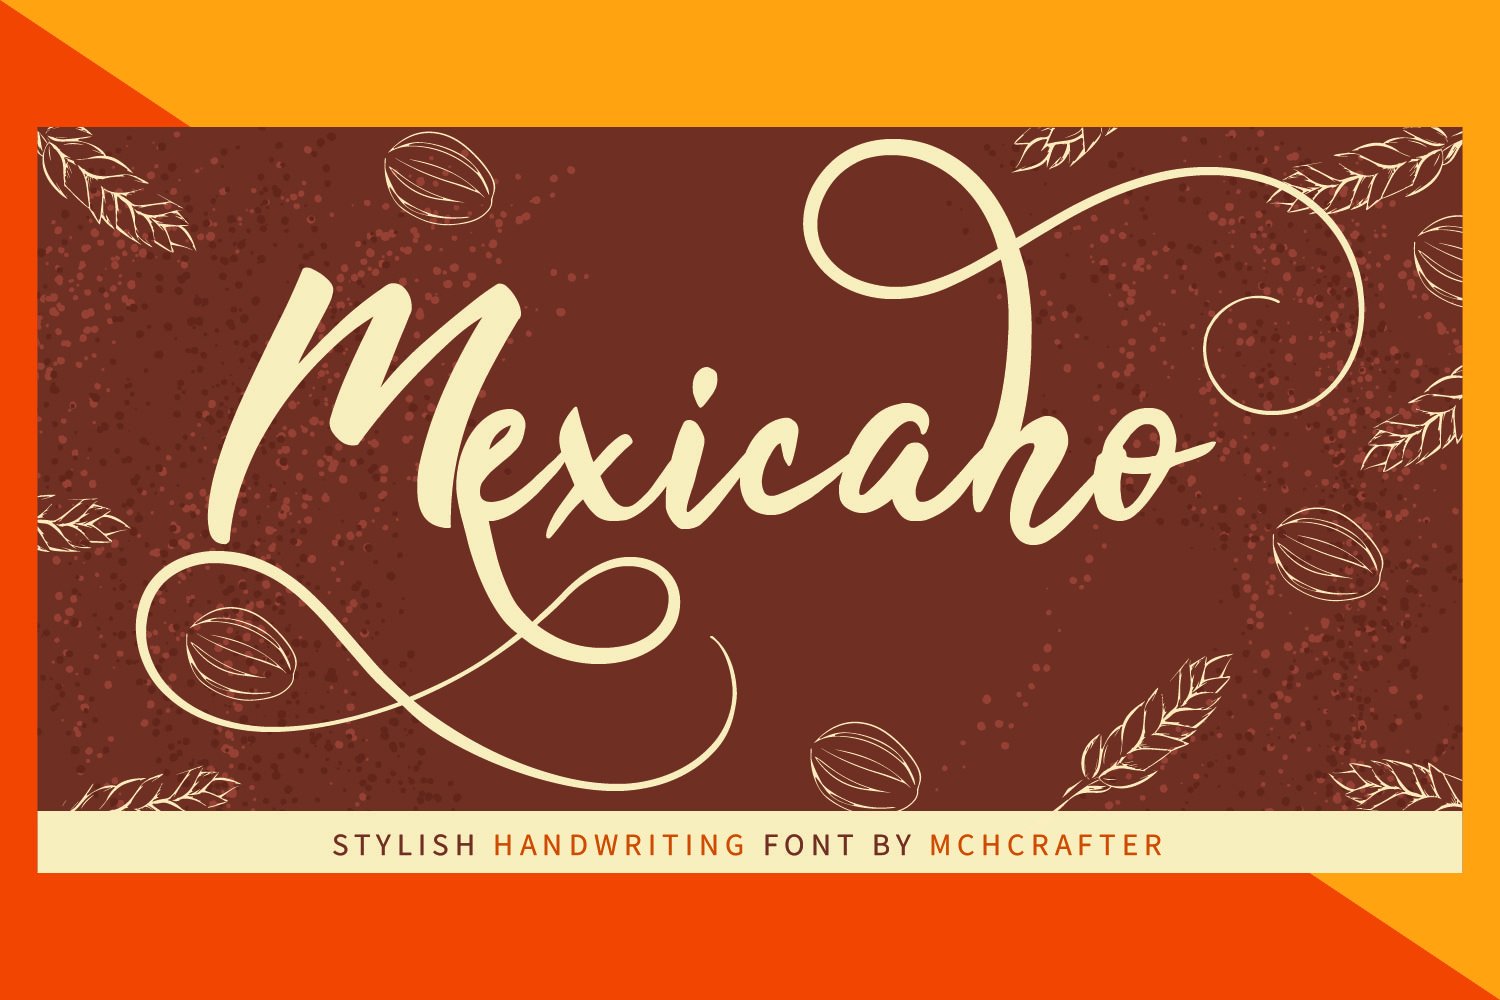 Mexicano Modern Calligraphy Typeface cover image.